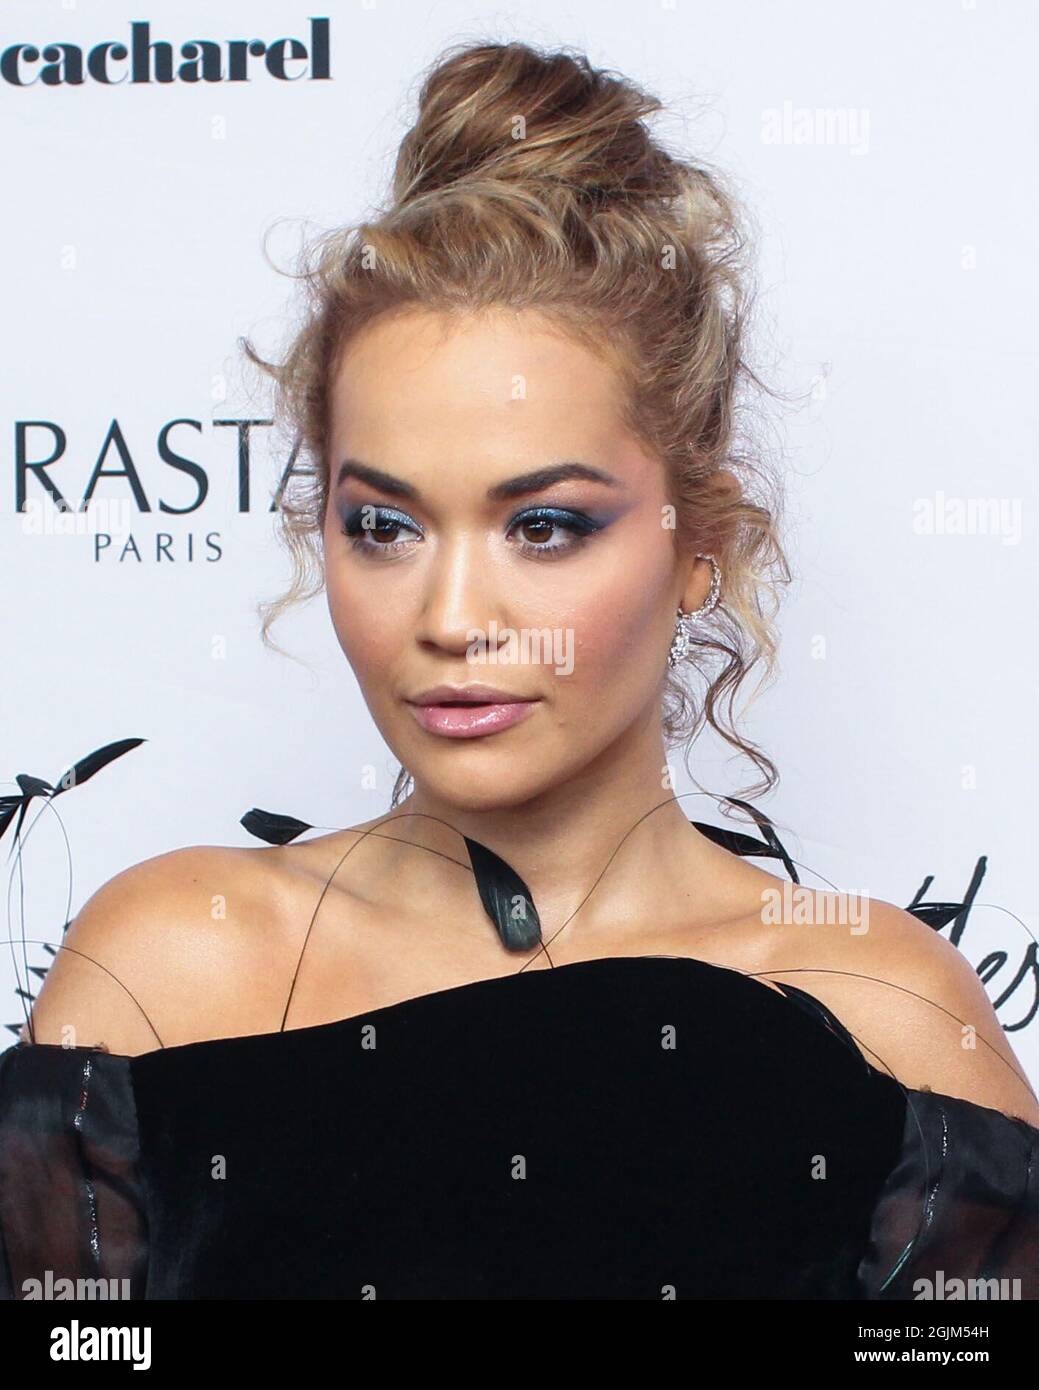 New York City, United States. 09th Sep, 2021. MANHATTAN, NEW YORK CITY, NEW YORK, USA - SEPTEMBER 09: Singer Rita Ora wearing an Antonio Grimaldi couture dress and a Tyler Ellis clutch arrives at The Daily Front Row 8th Annual Fashion Media Awards held at The Rainbow Room at Rockefeller Center on September 9, 2021 in Manhattan, New York City, New York, United States. (Photo by Jordan Hinton/Image Press Agency/Sipa USA) Credit: Sipa USA/Alamy Live News Stock Photo